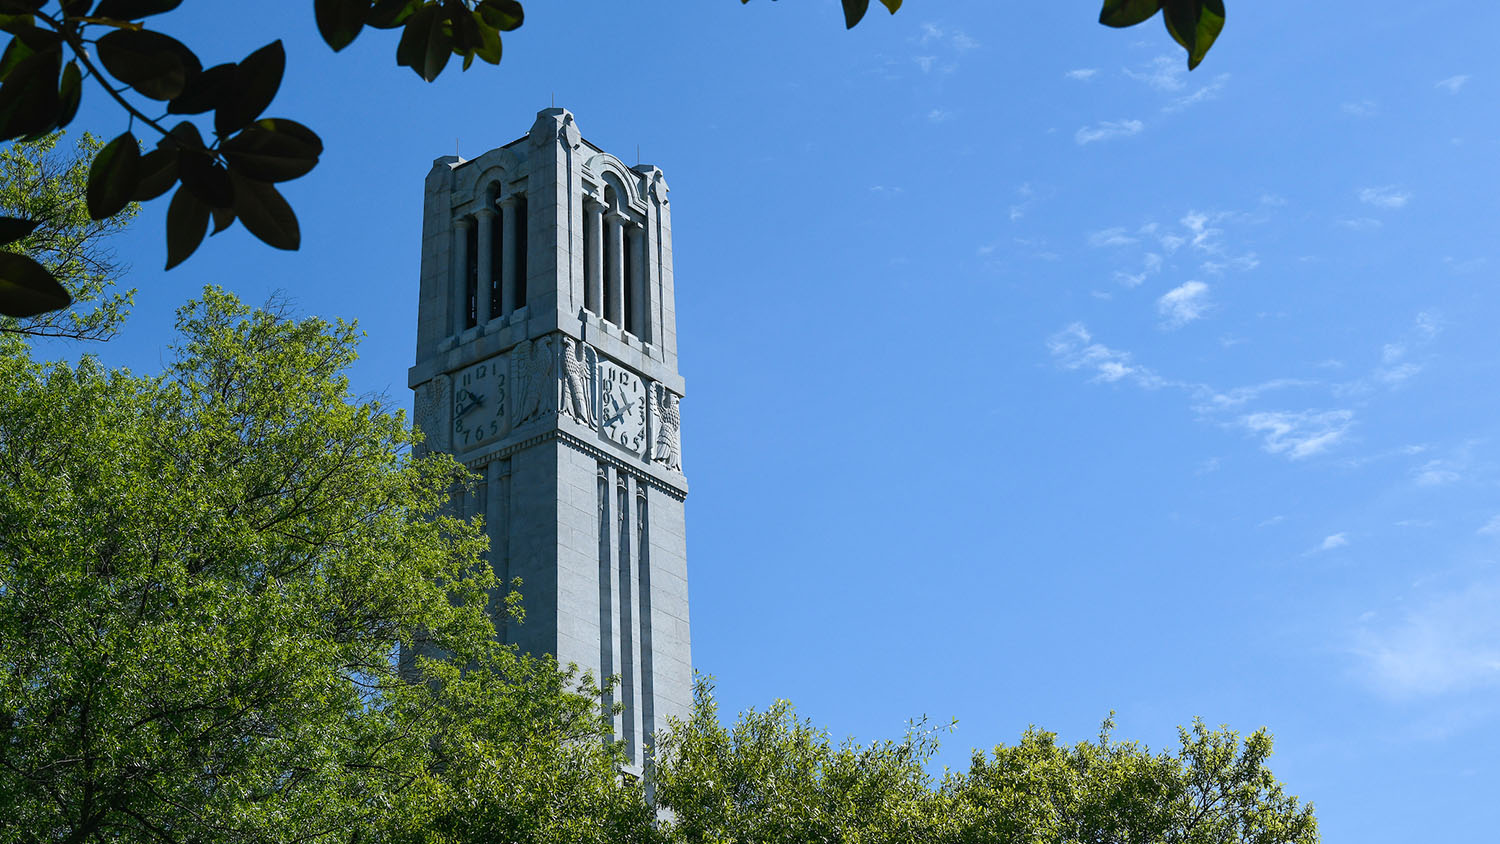 The NC State belltower, framed against a clear sky.